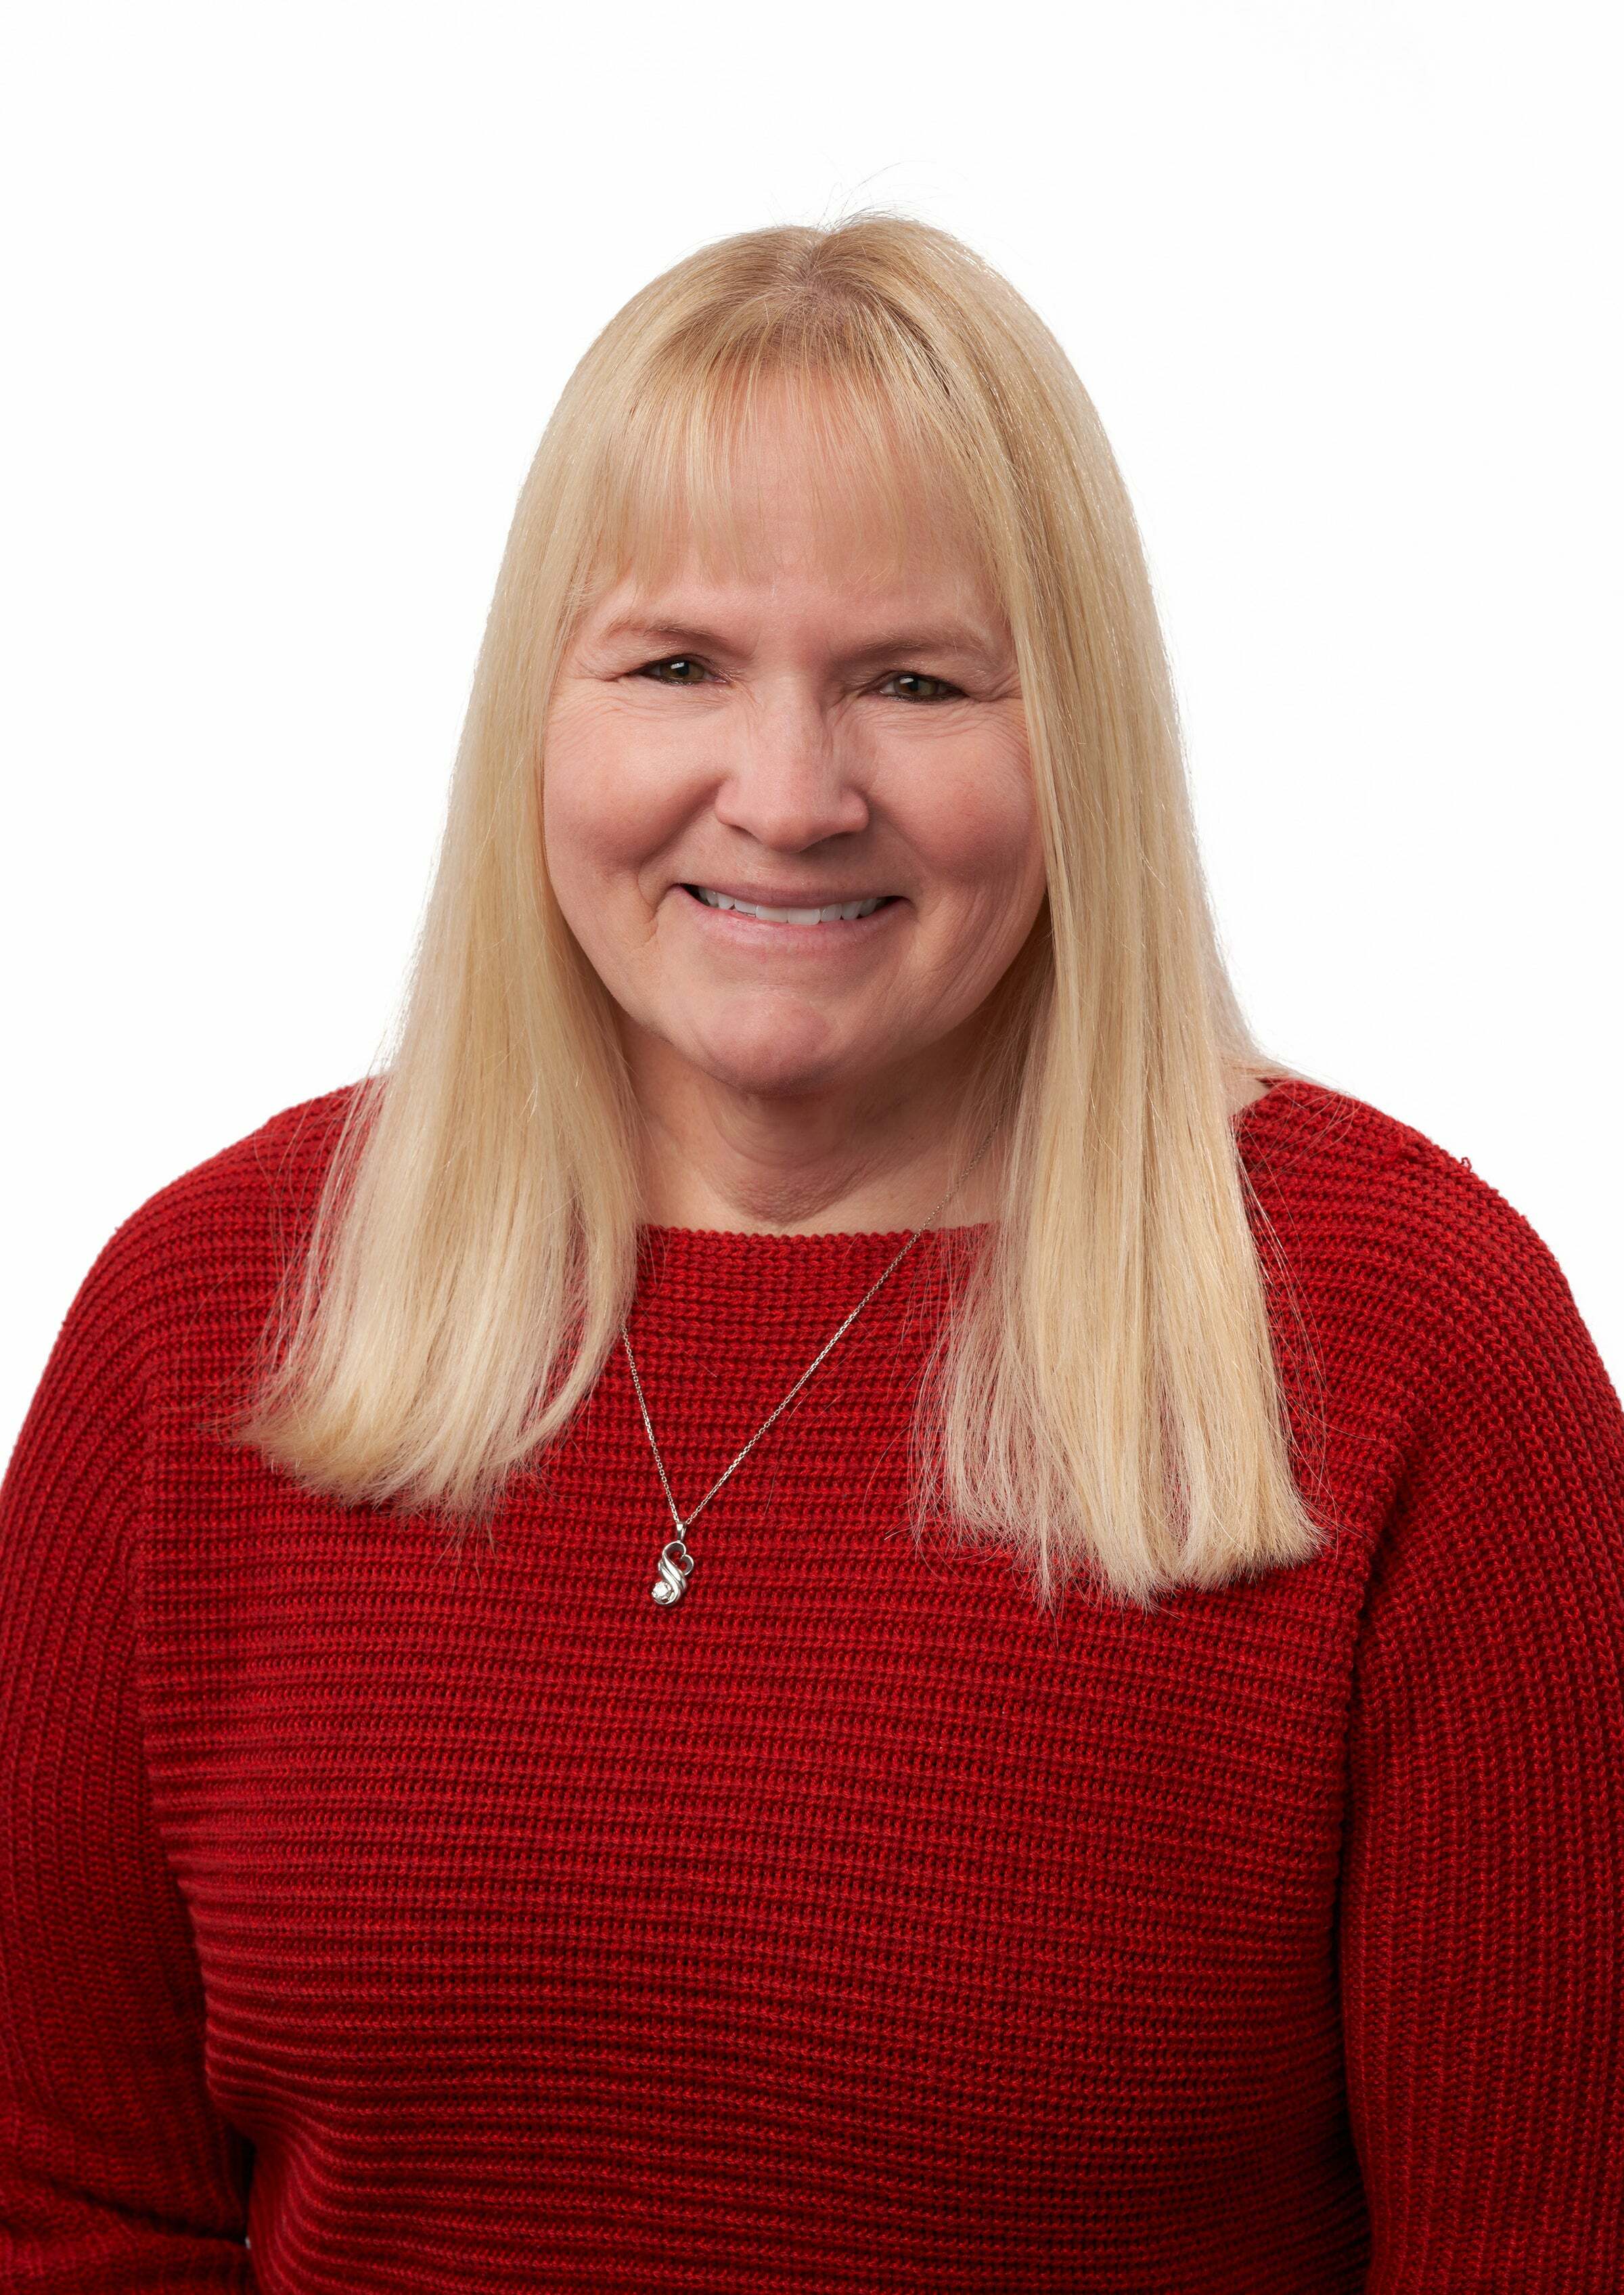 Cindy Macy, Real Estate Salesperson in Newburgh, ERA First Advantage Realty, Inc.